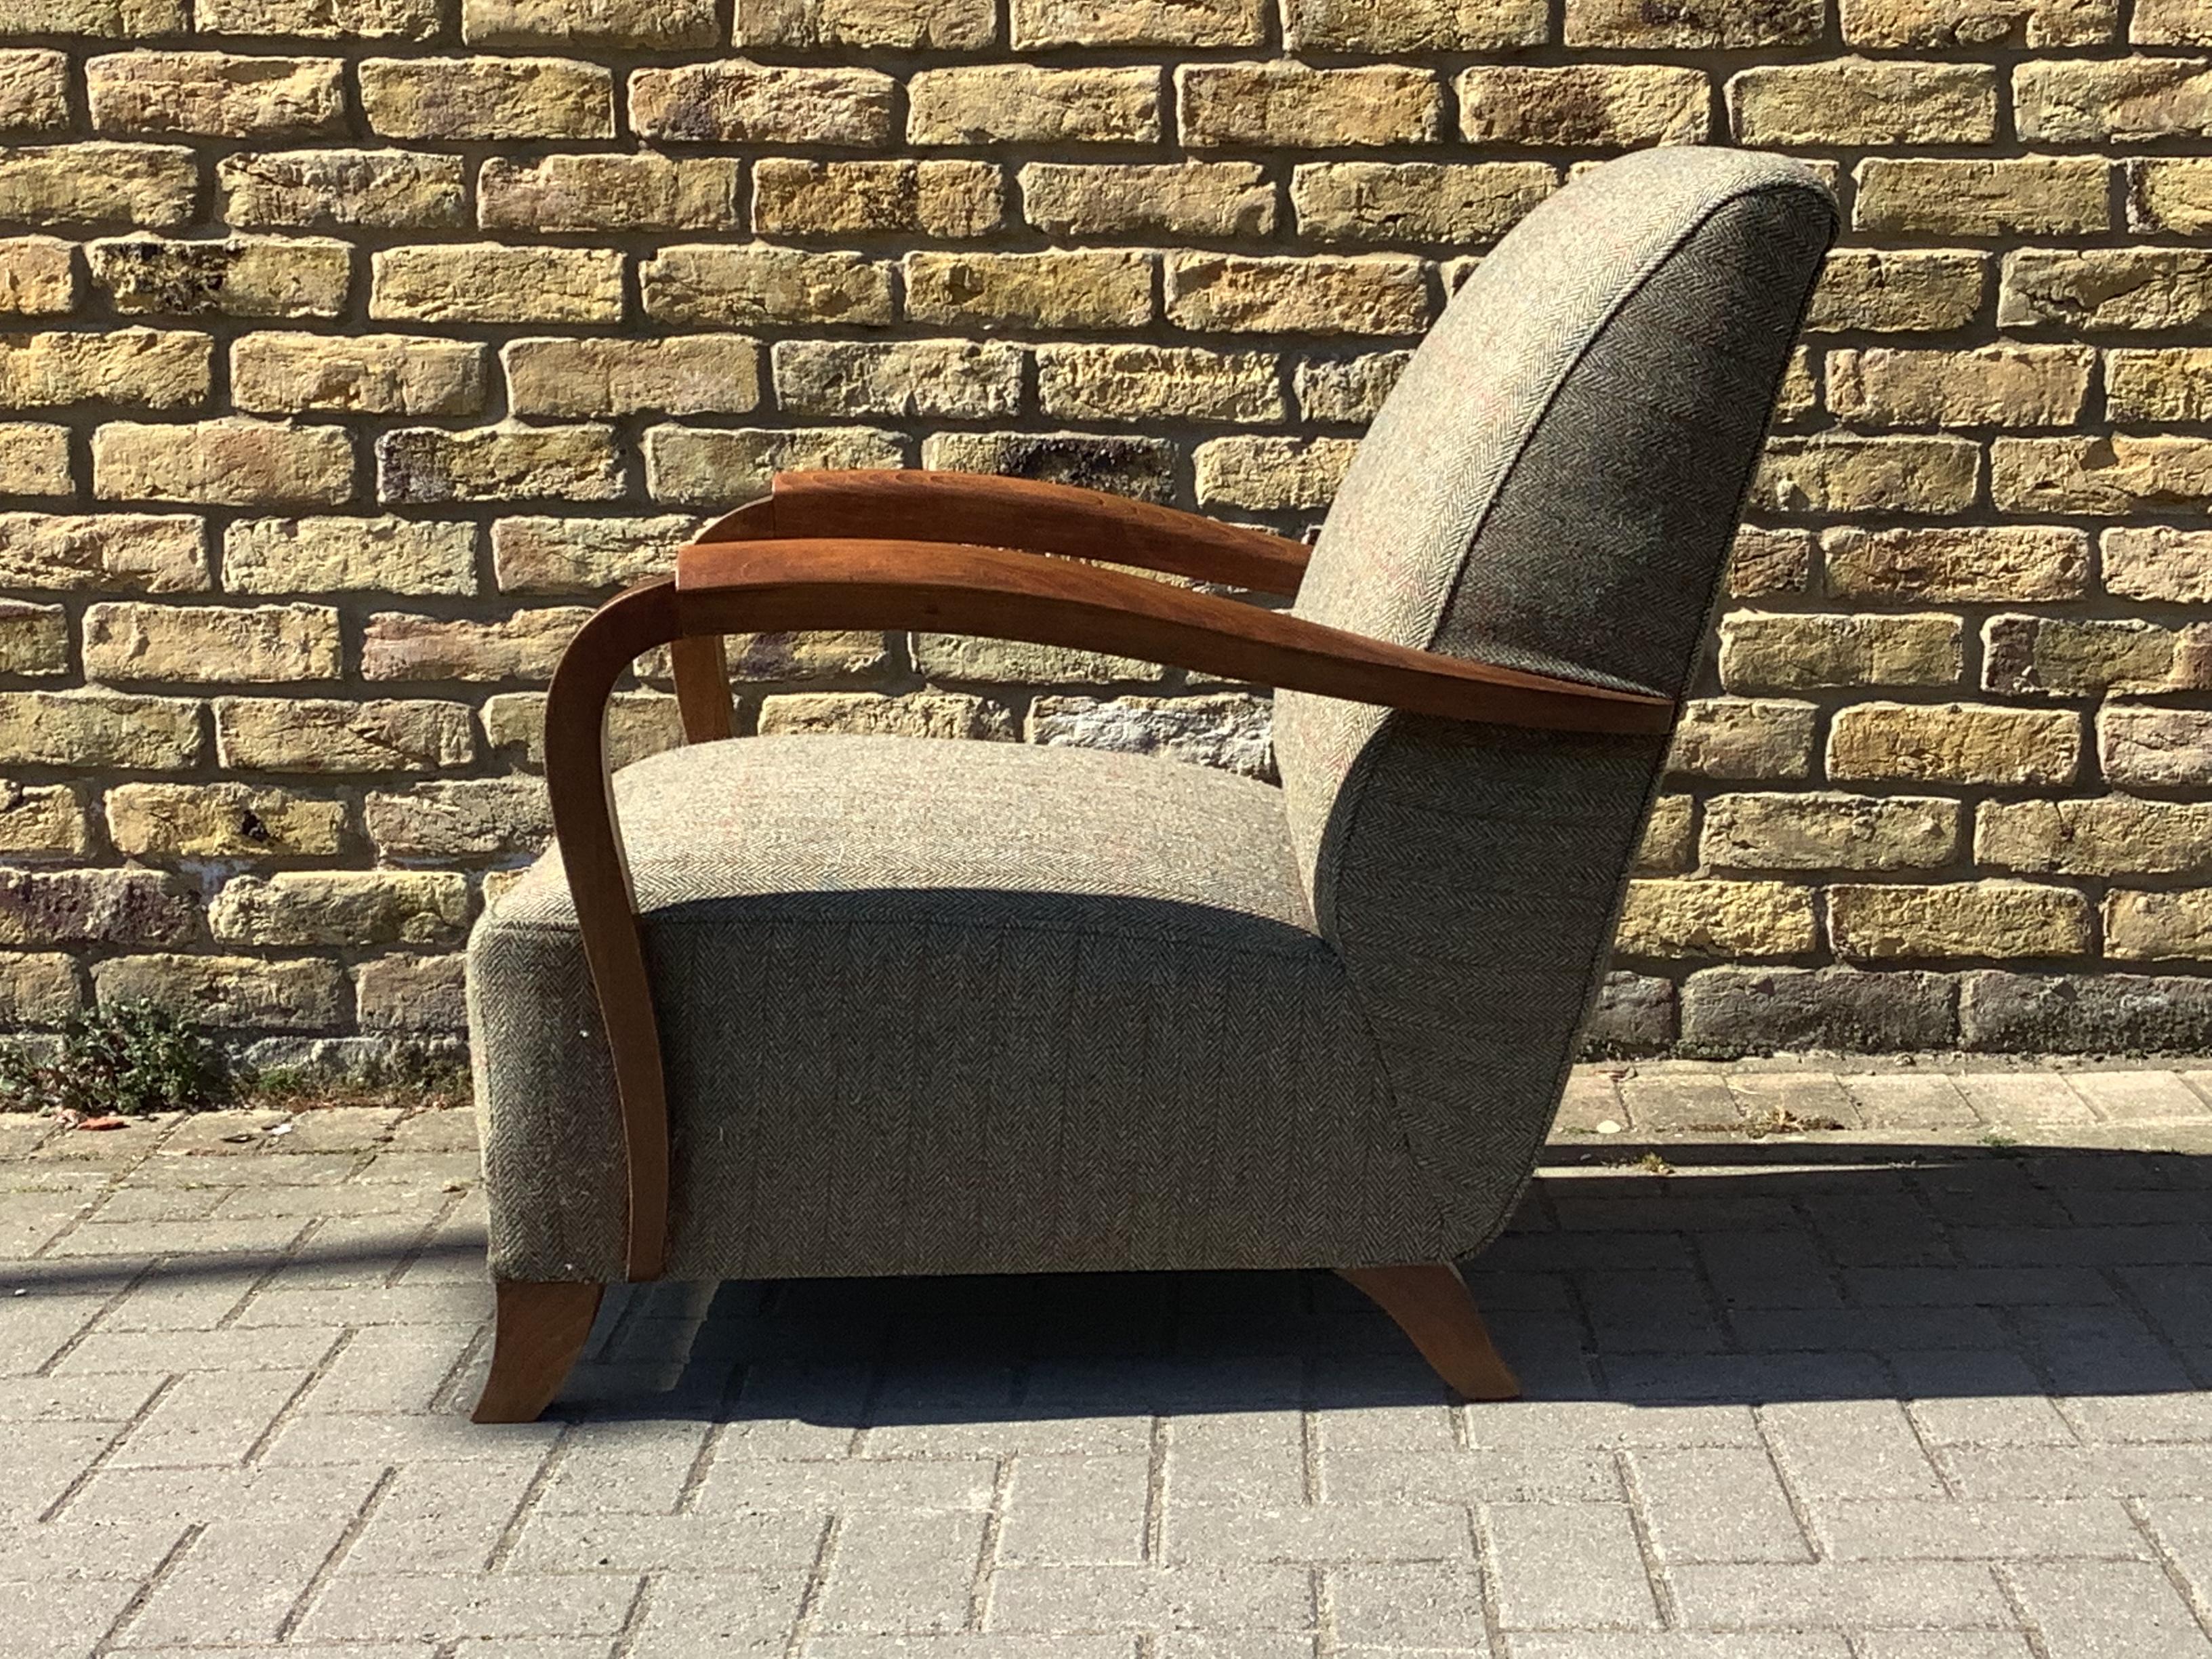 Superb French armchair reupholstered in a fine Tweed fabric
Polished steams bent arms fully restored. Wonderful piece.